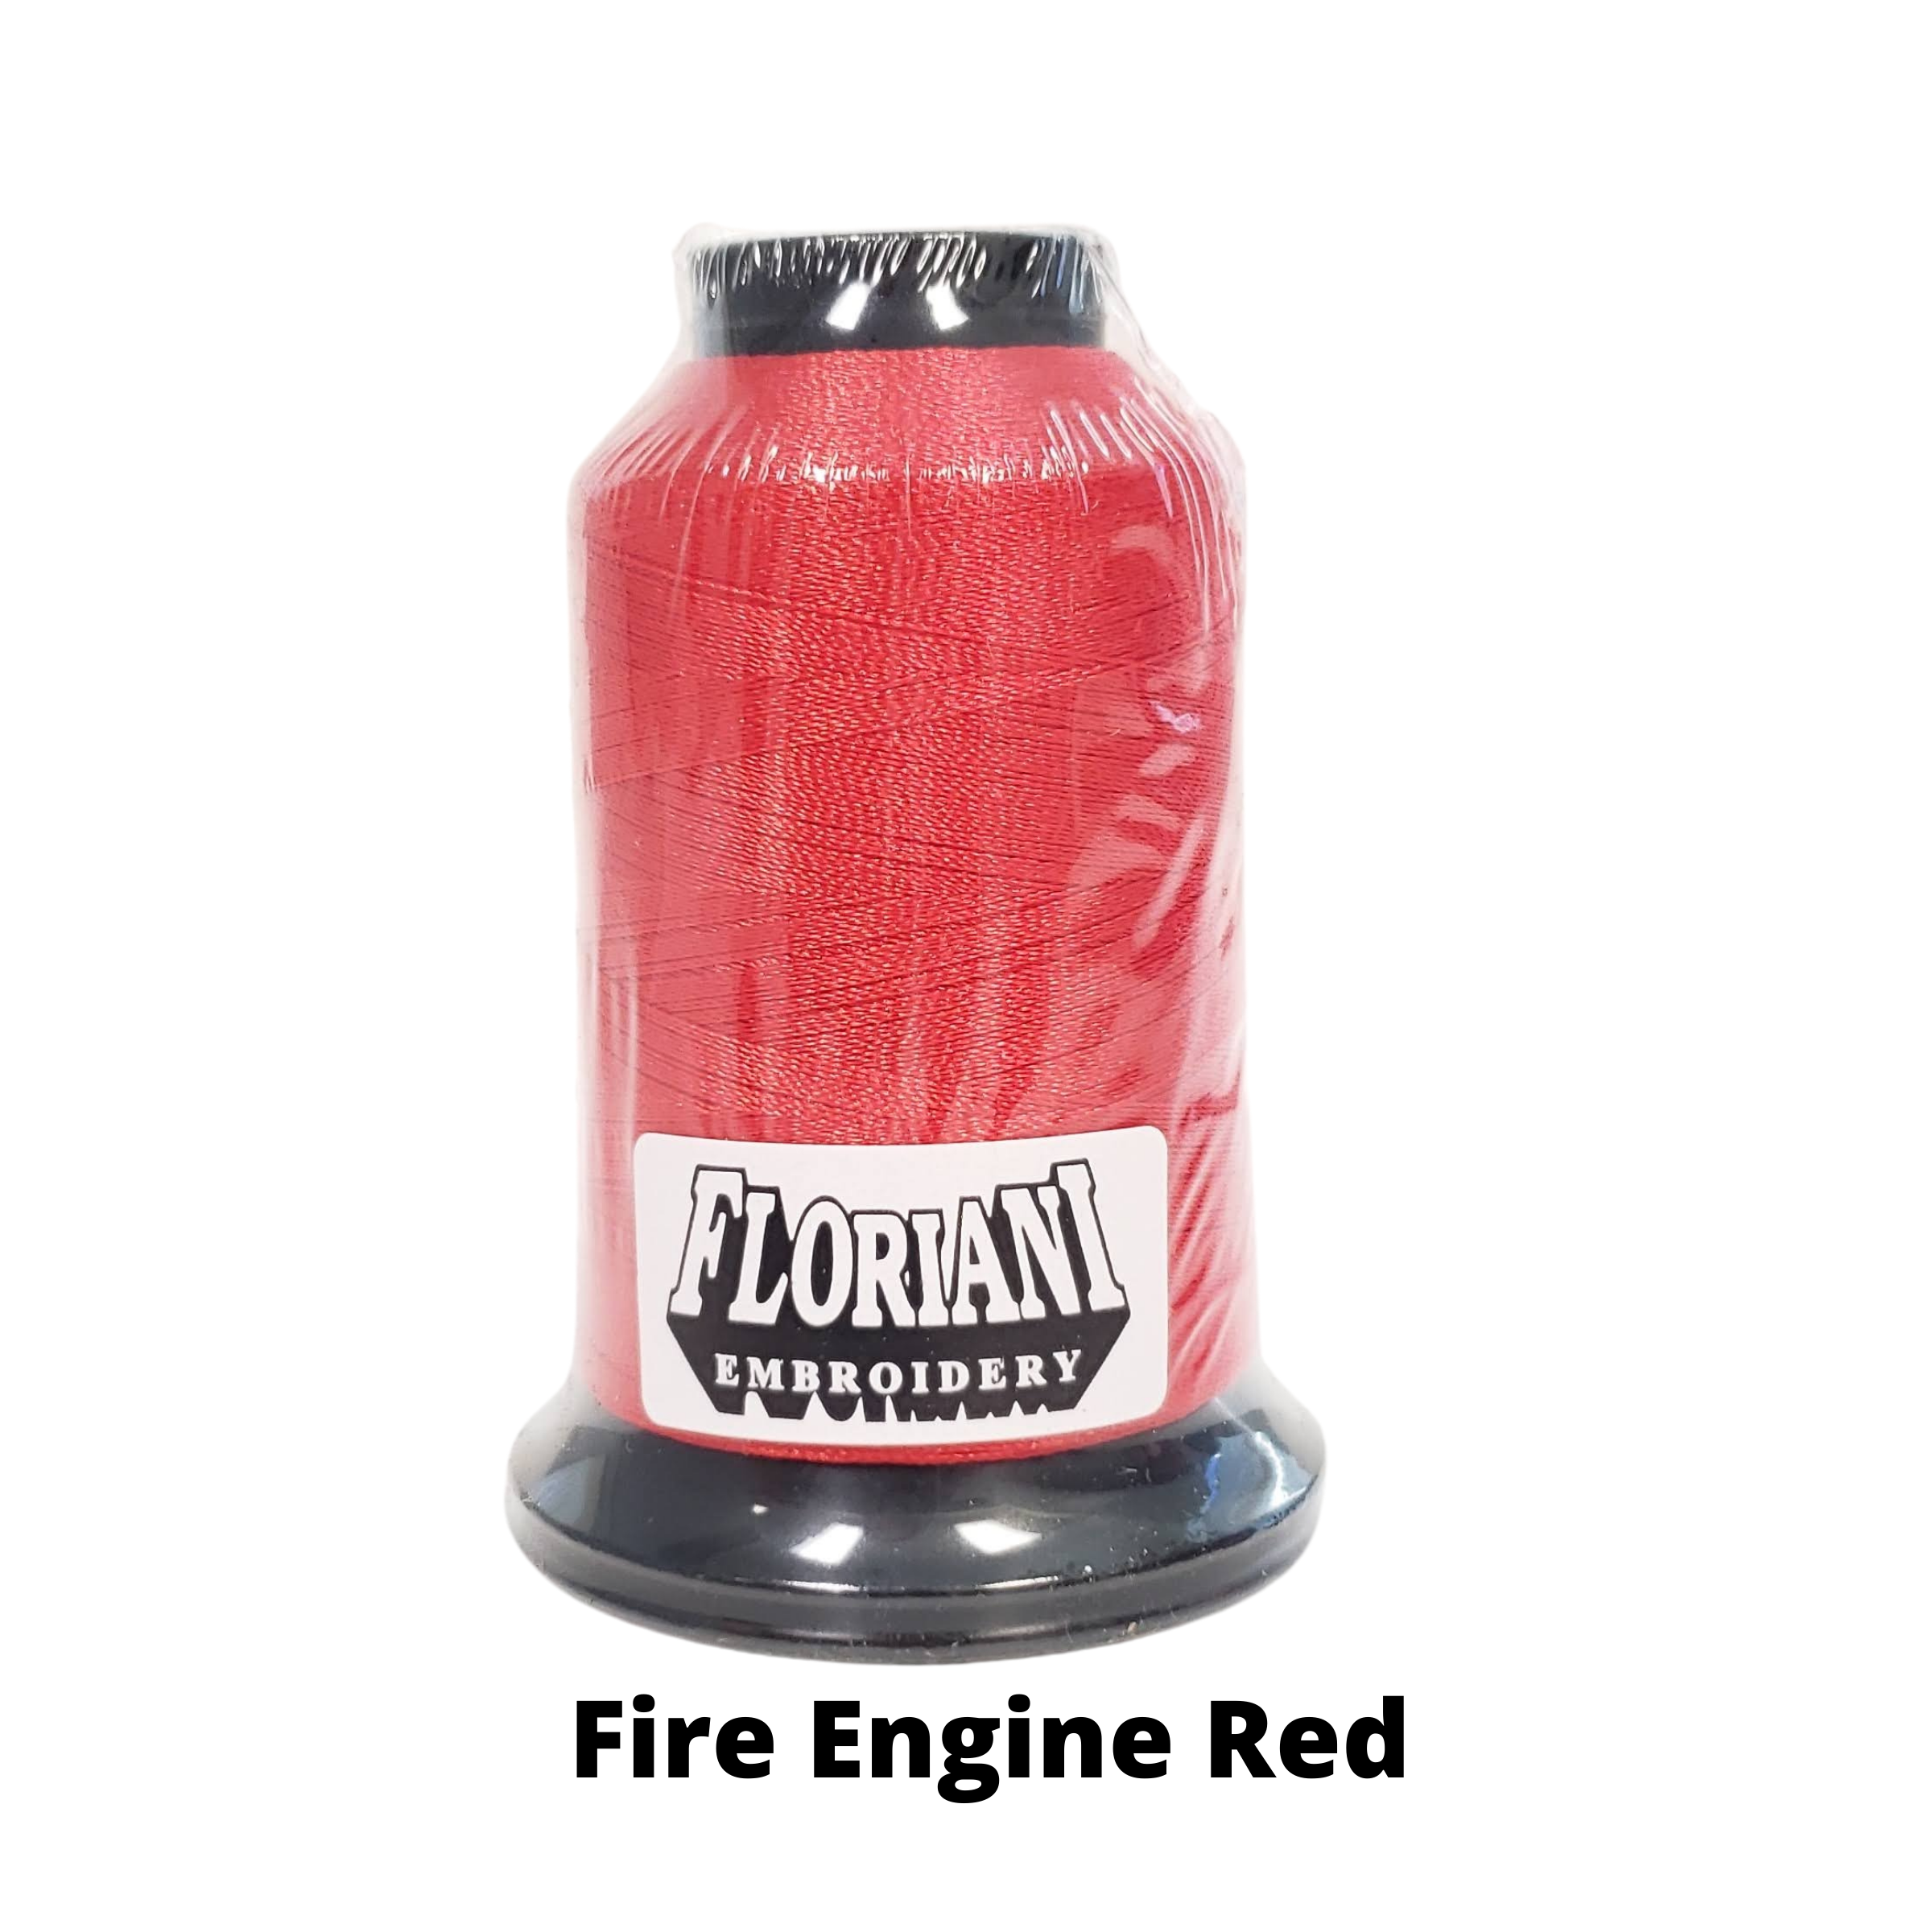 Floriani Fire Engine Red embroidery thread (LGPF0702)- Moore's Sewing